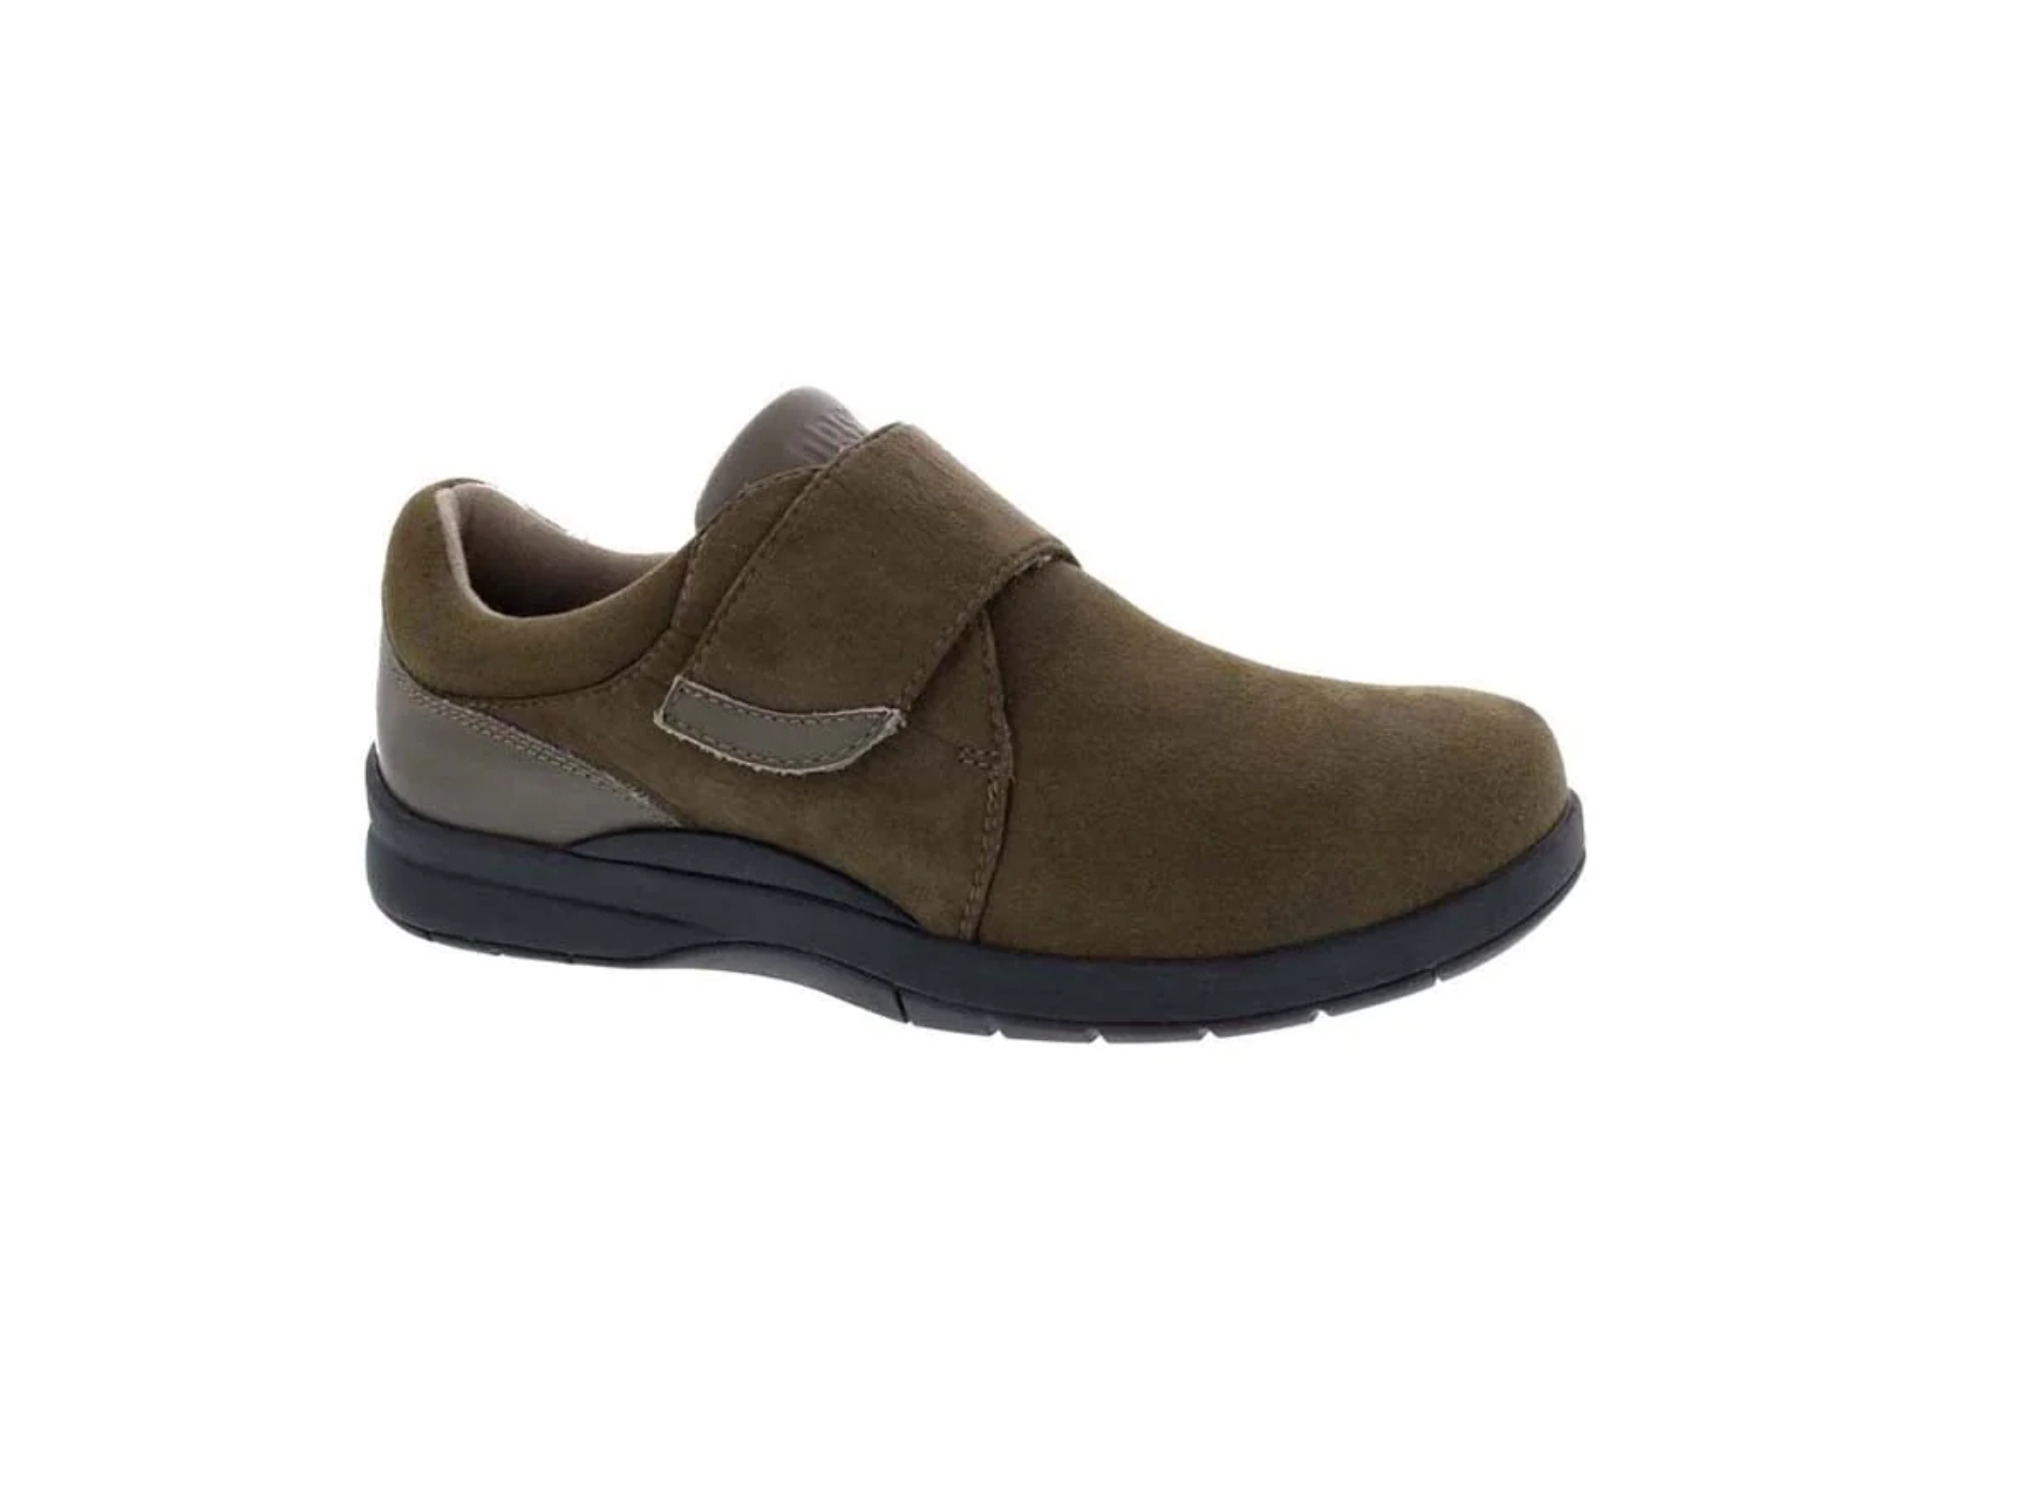 DREW MOONWALK WOMEN CASUAL SHOE IN OLIVE STRETCH LEATHER - image 1 of 4